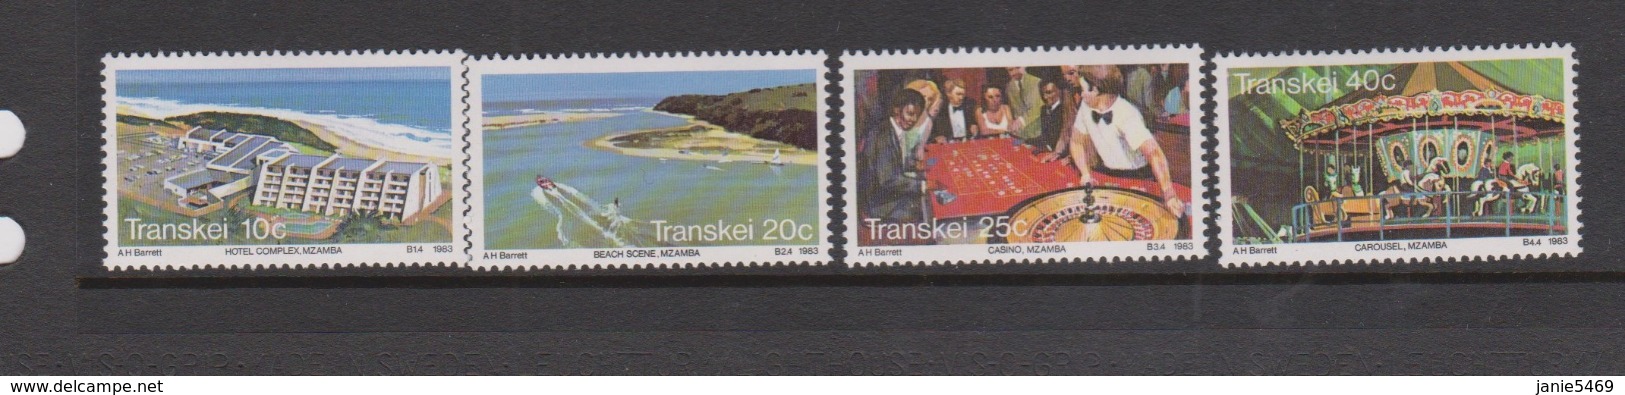 South Africa-Transkei SG 121-124 1983 Wildcoast Holiday Complex,Mint Never Hinged - Transkei